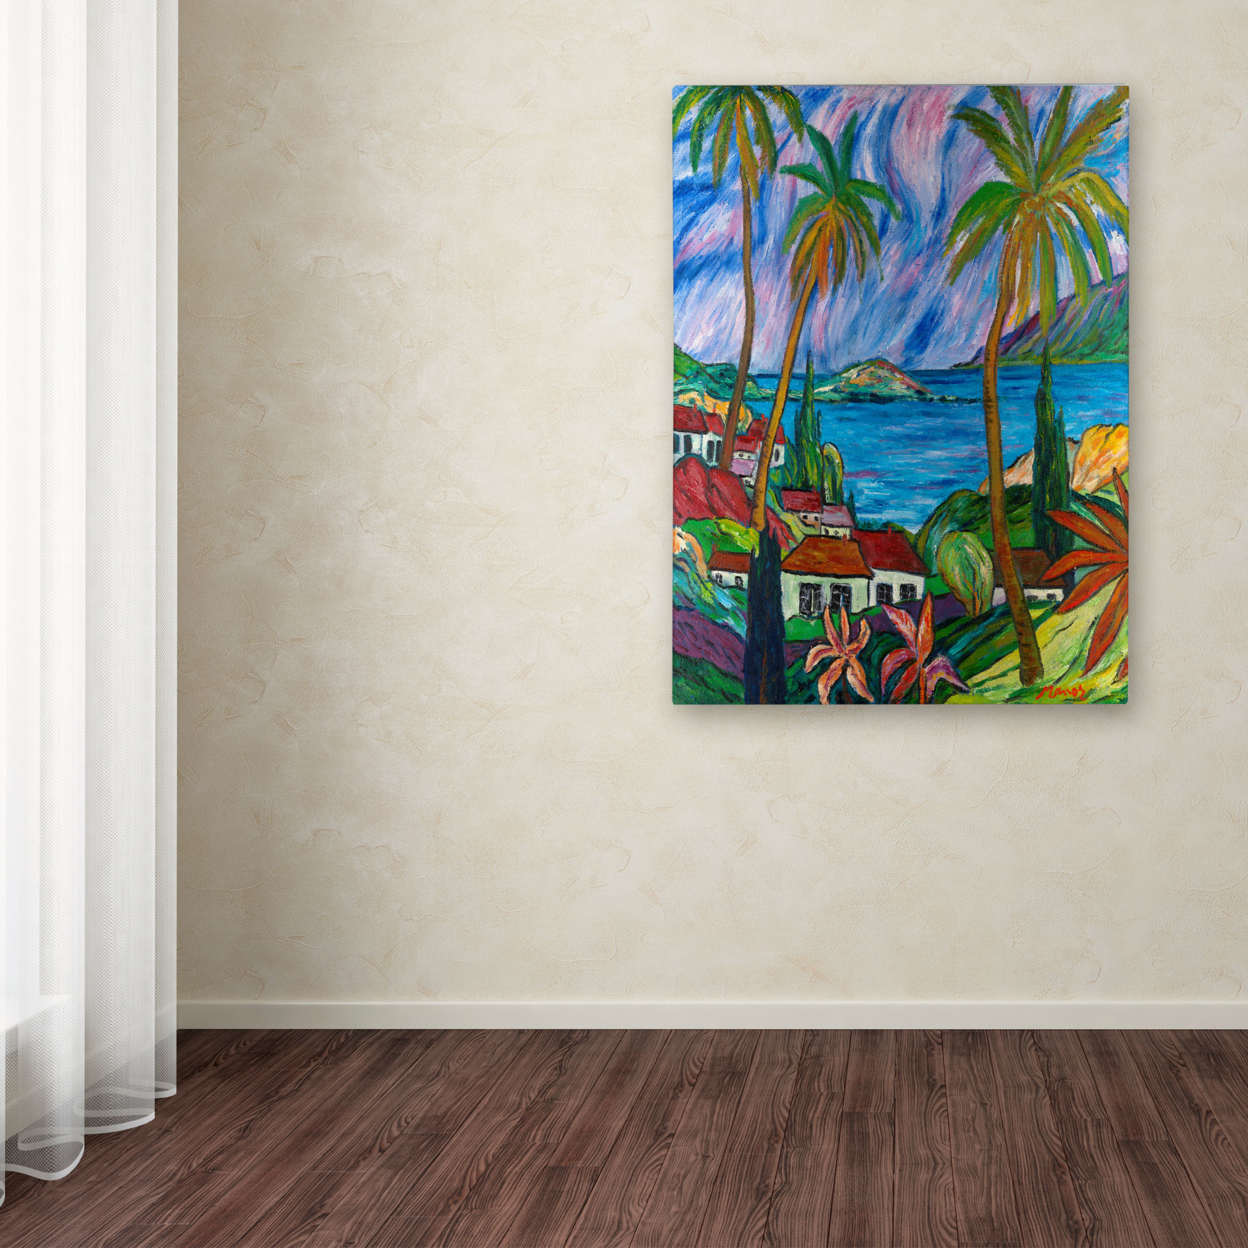 Manor Shadian 'Tropical Paradise' Canvas Wall Art 35 X 47 Inches